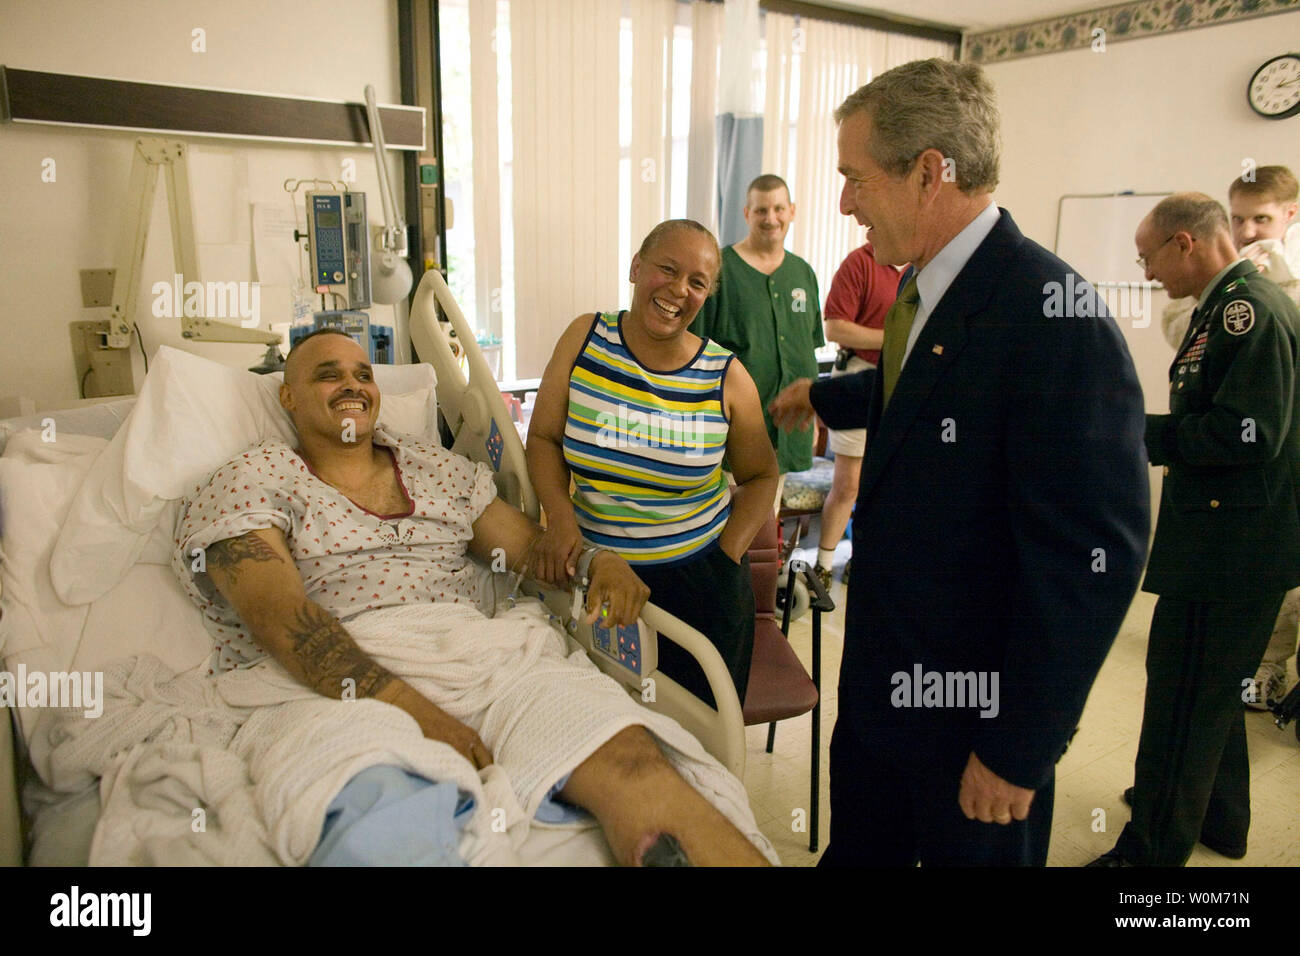 President George W. Bush shares a light moment with Sgt. John Iverson and his wife, Pamela, during the President's visit Friday, July 1, 2005, to Walter Reed Army Medical Center.  The Long Beach, California soldier is recovering from injuries sustained while serving in Iraq.  (UPI Photo/Eric Draper/White House) Stock Photo